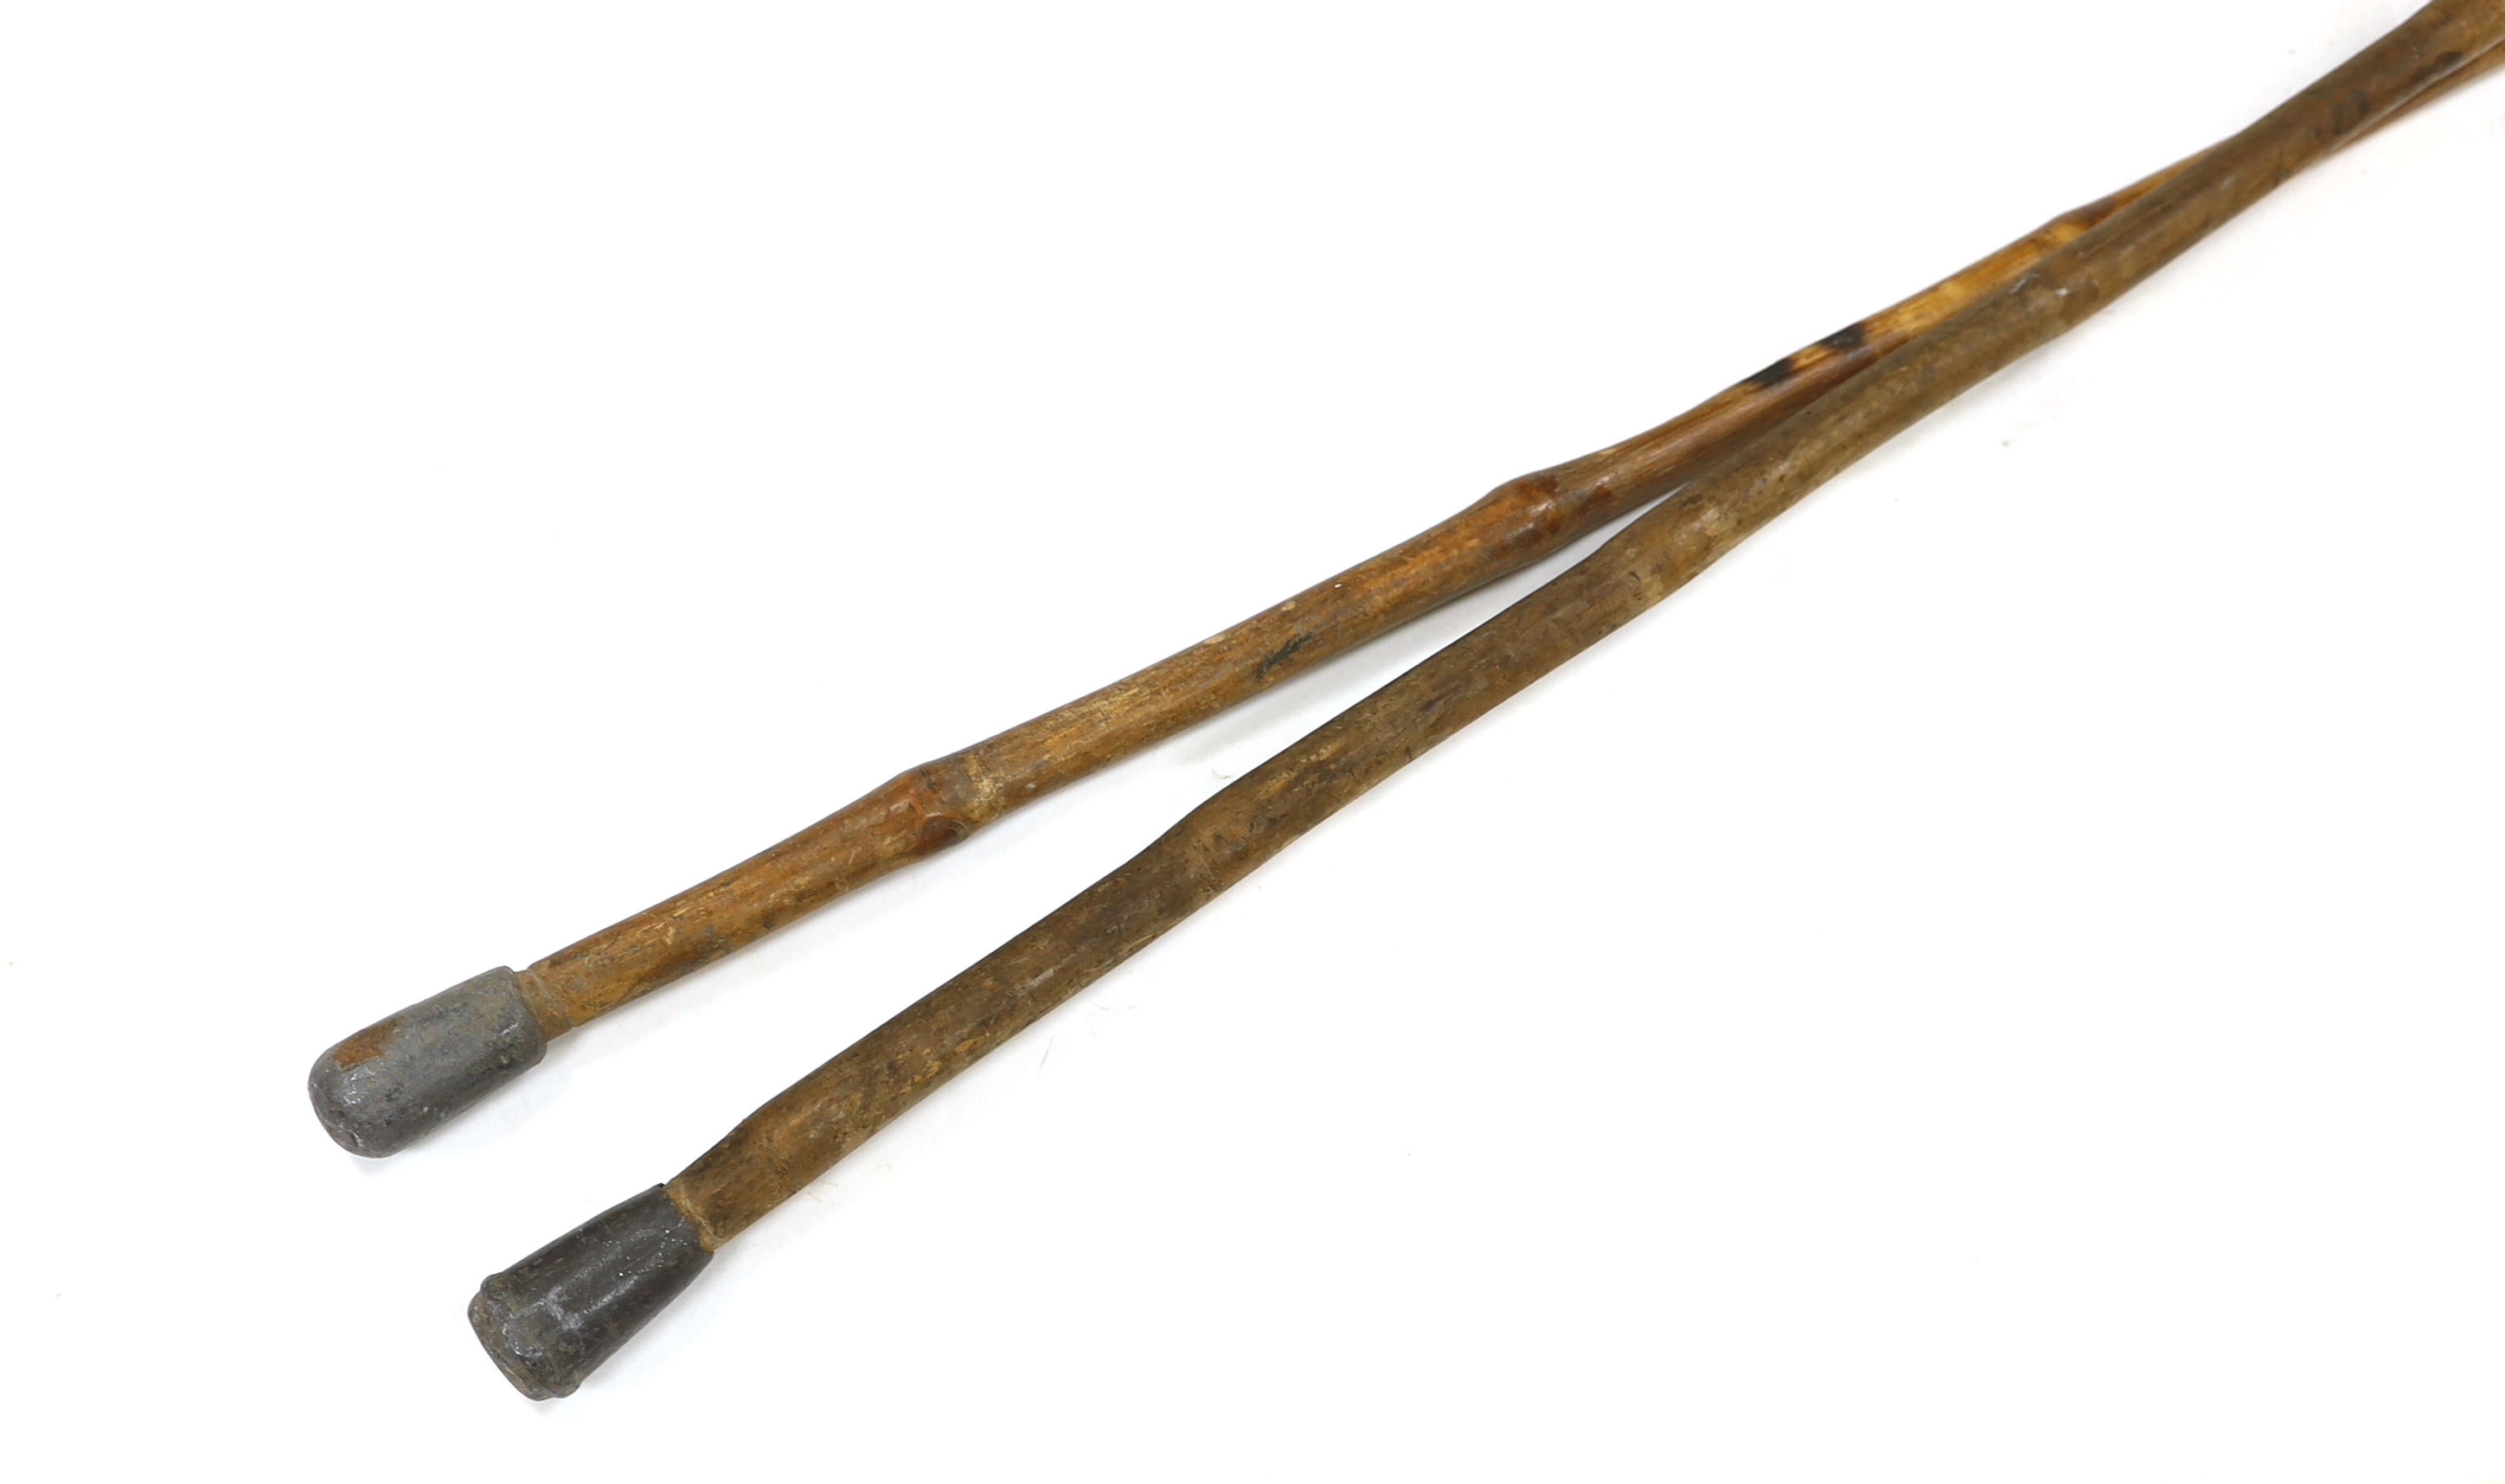 Two late 19th/early 20th century Indian Pig Sticking lances, longer 215cm